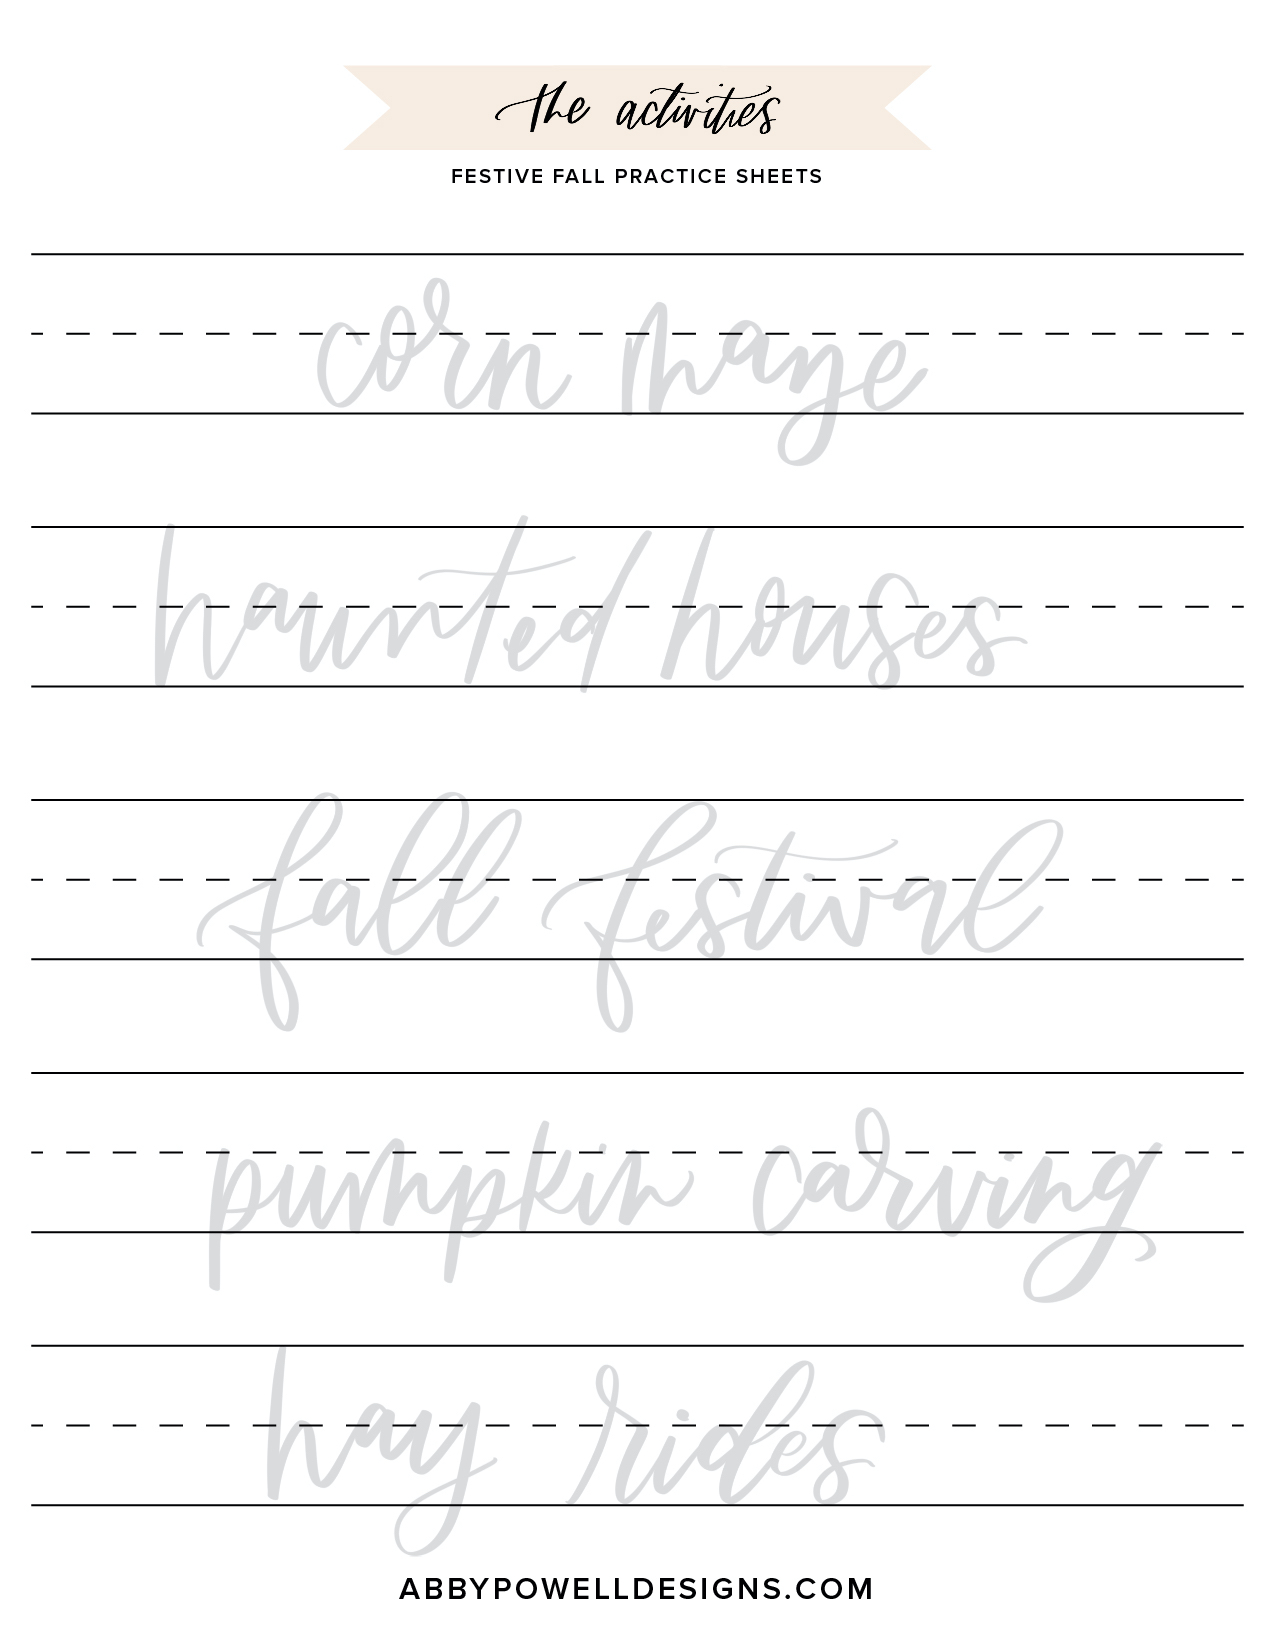 Practice lettering fall activity words and phrases with these fun lettering practice sheets by Abby Powell.